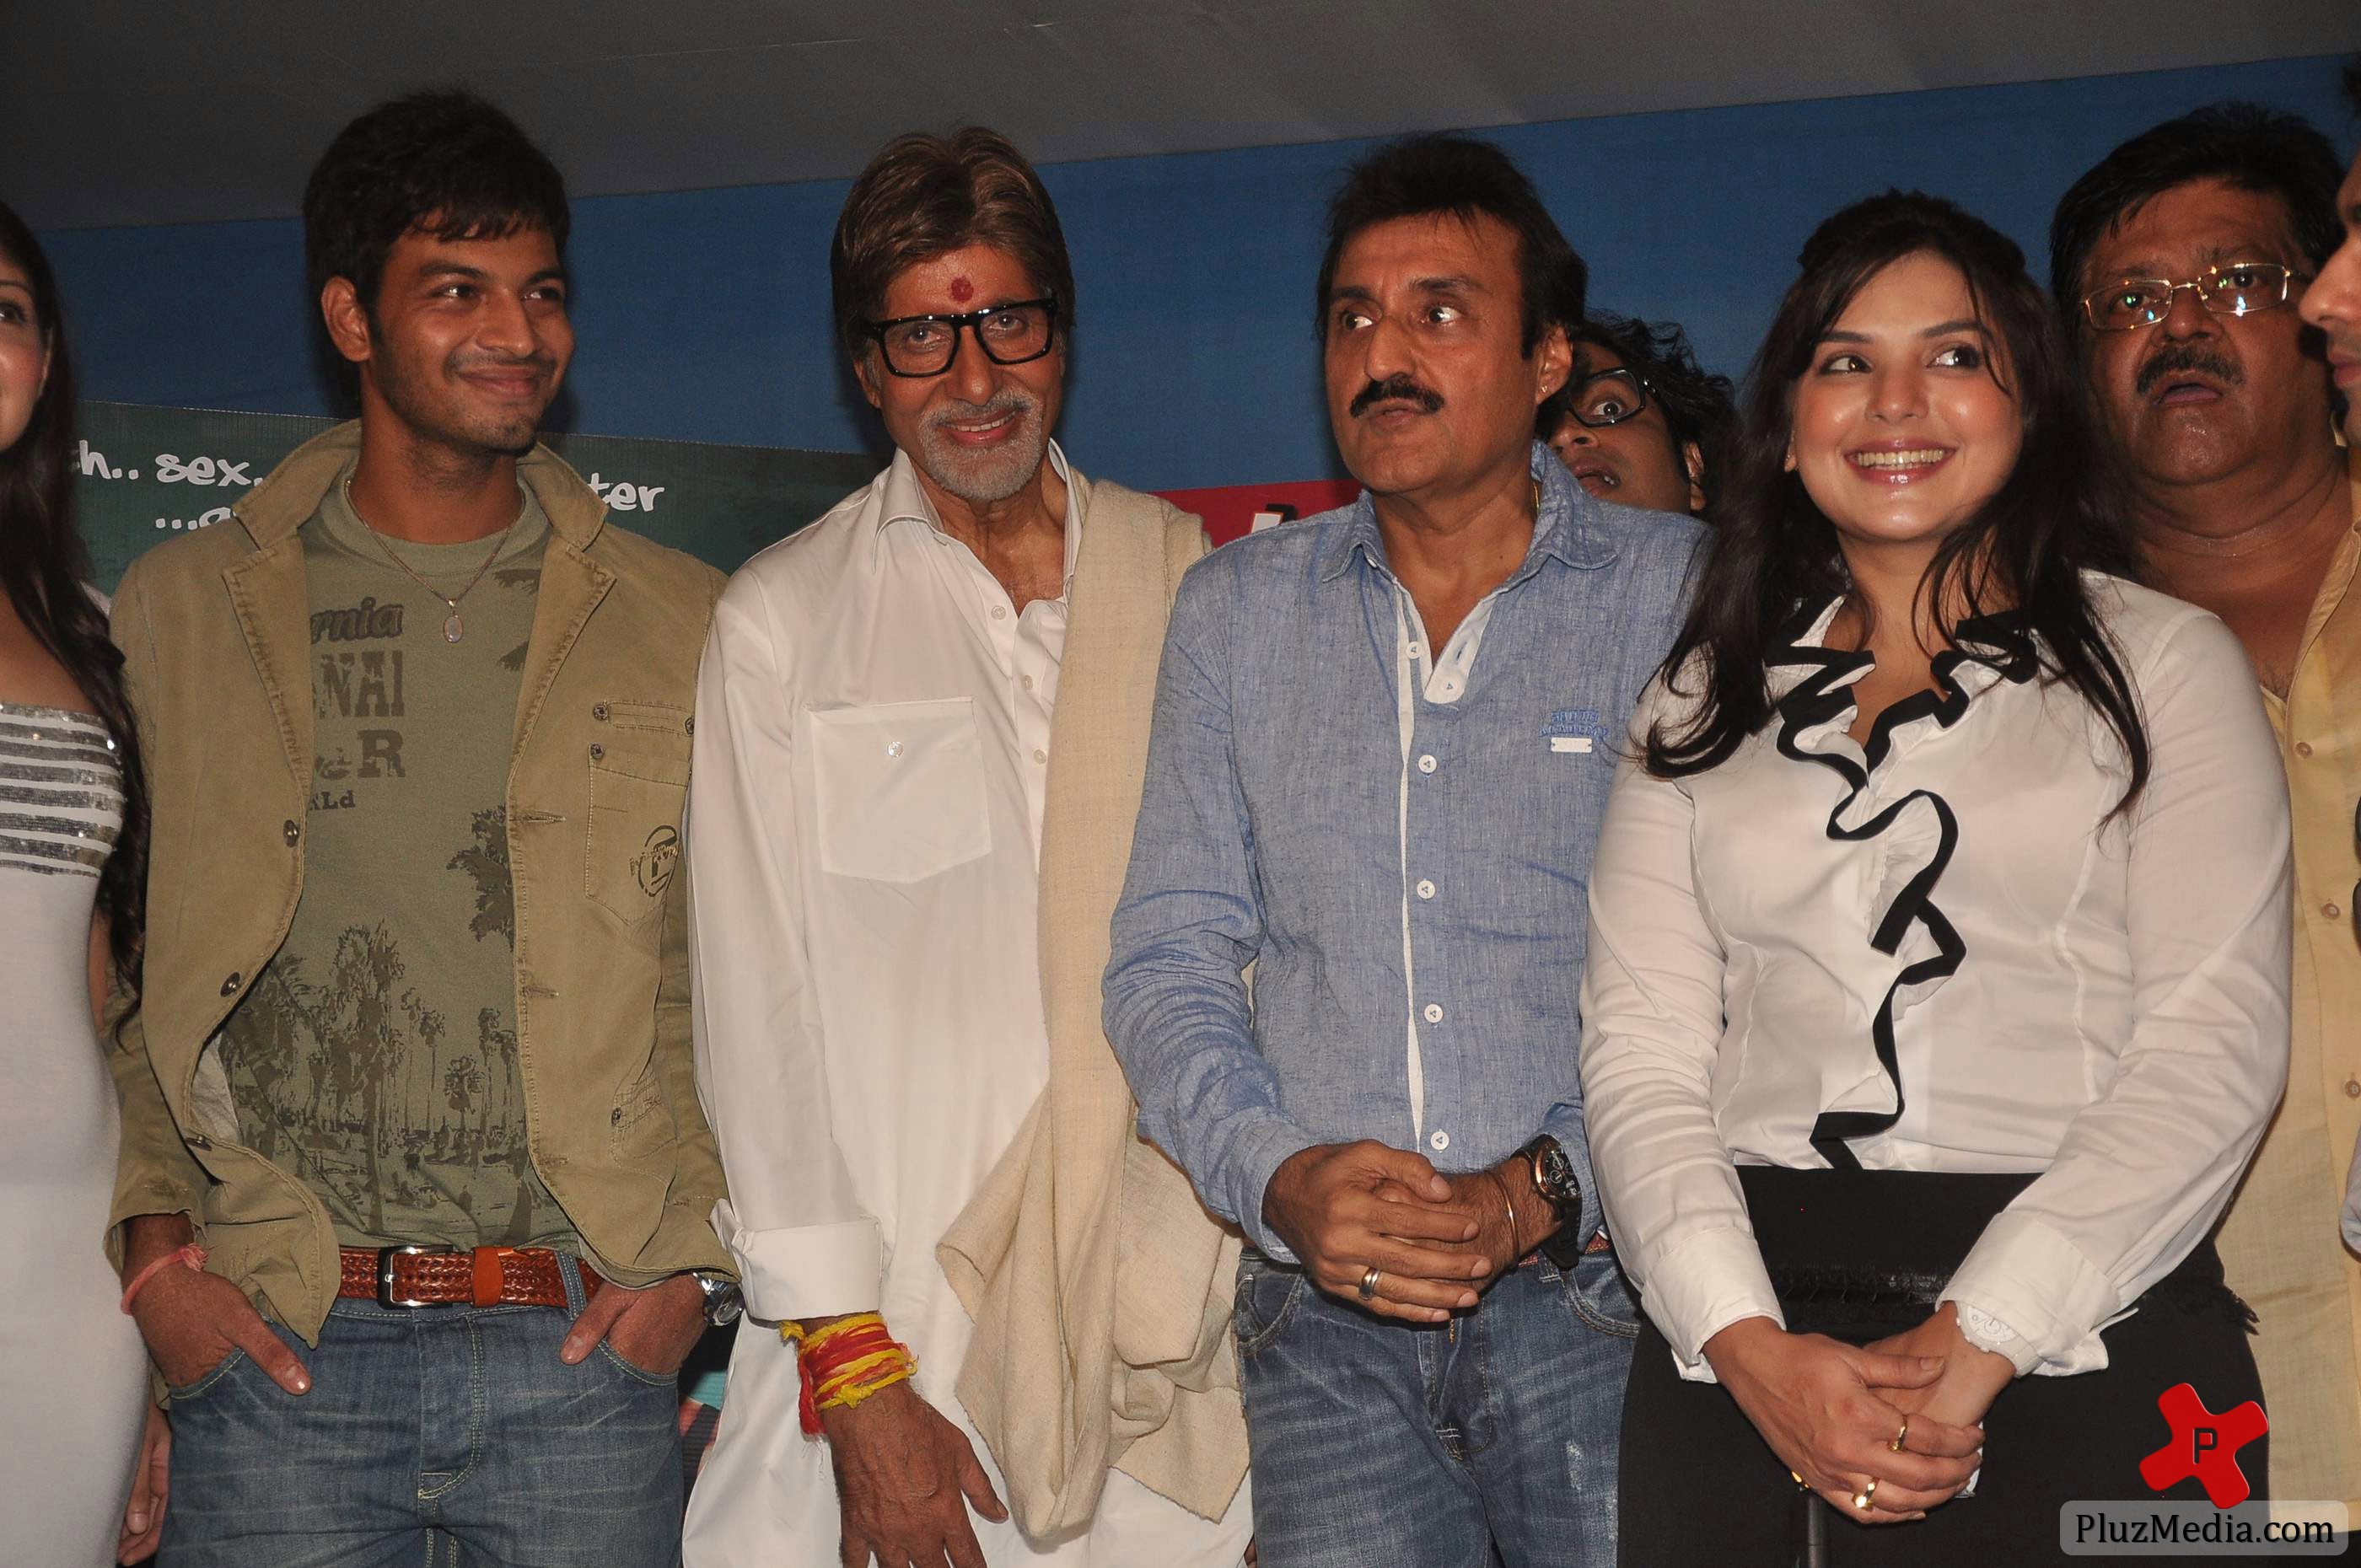 Big B at 'Delhi Eye' film launch pictures | Picture 82533